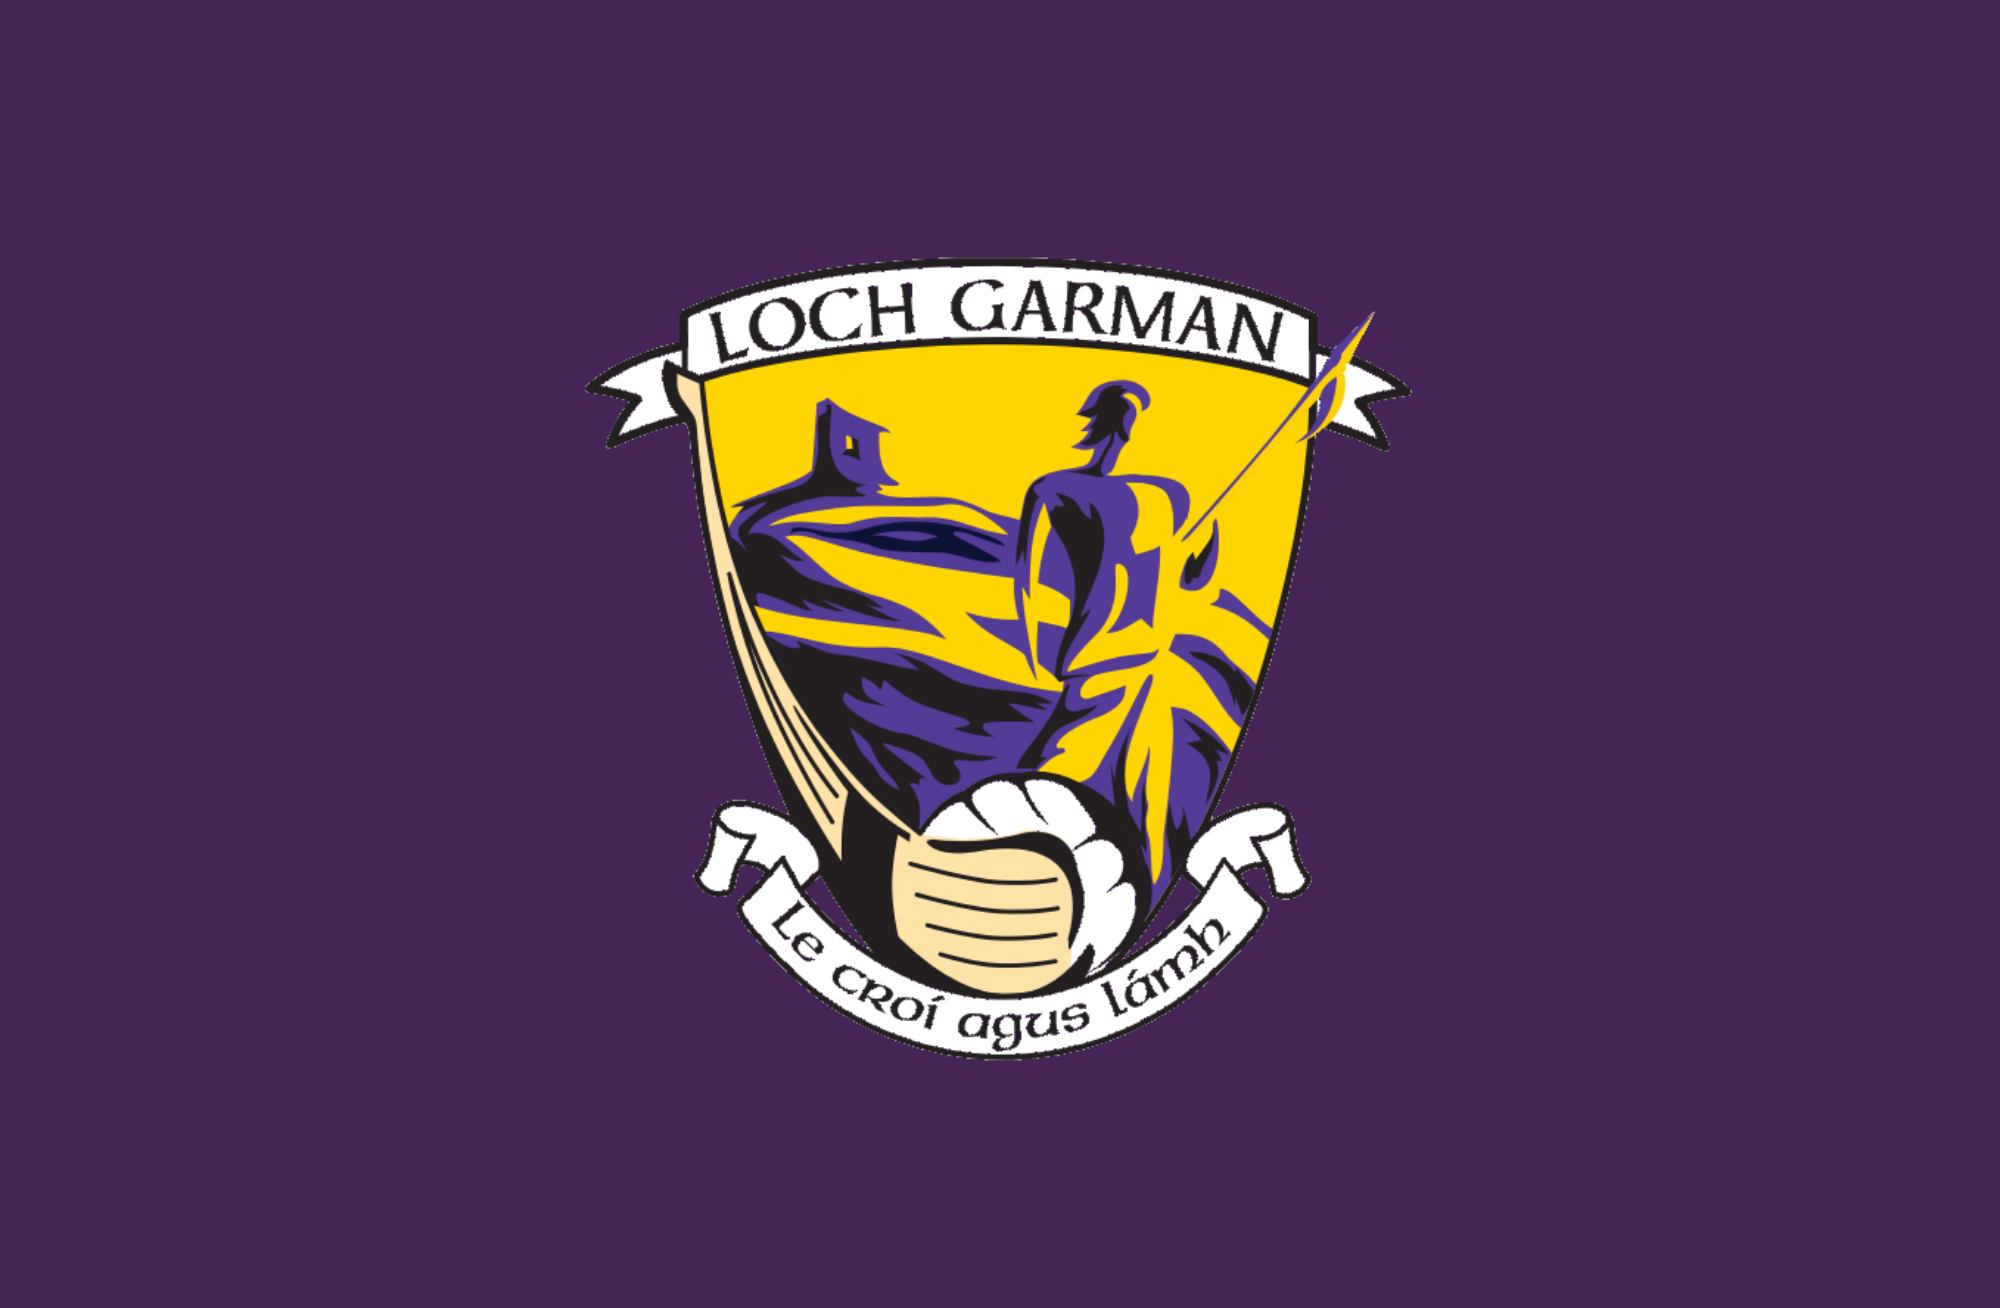 Statement from Wexford GAA on 18.03.20 regarding COVID-19